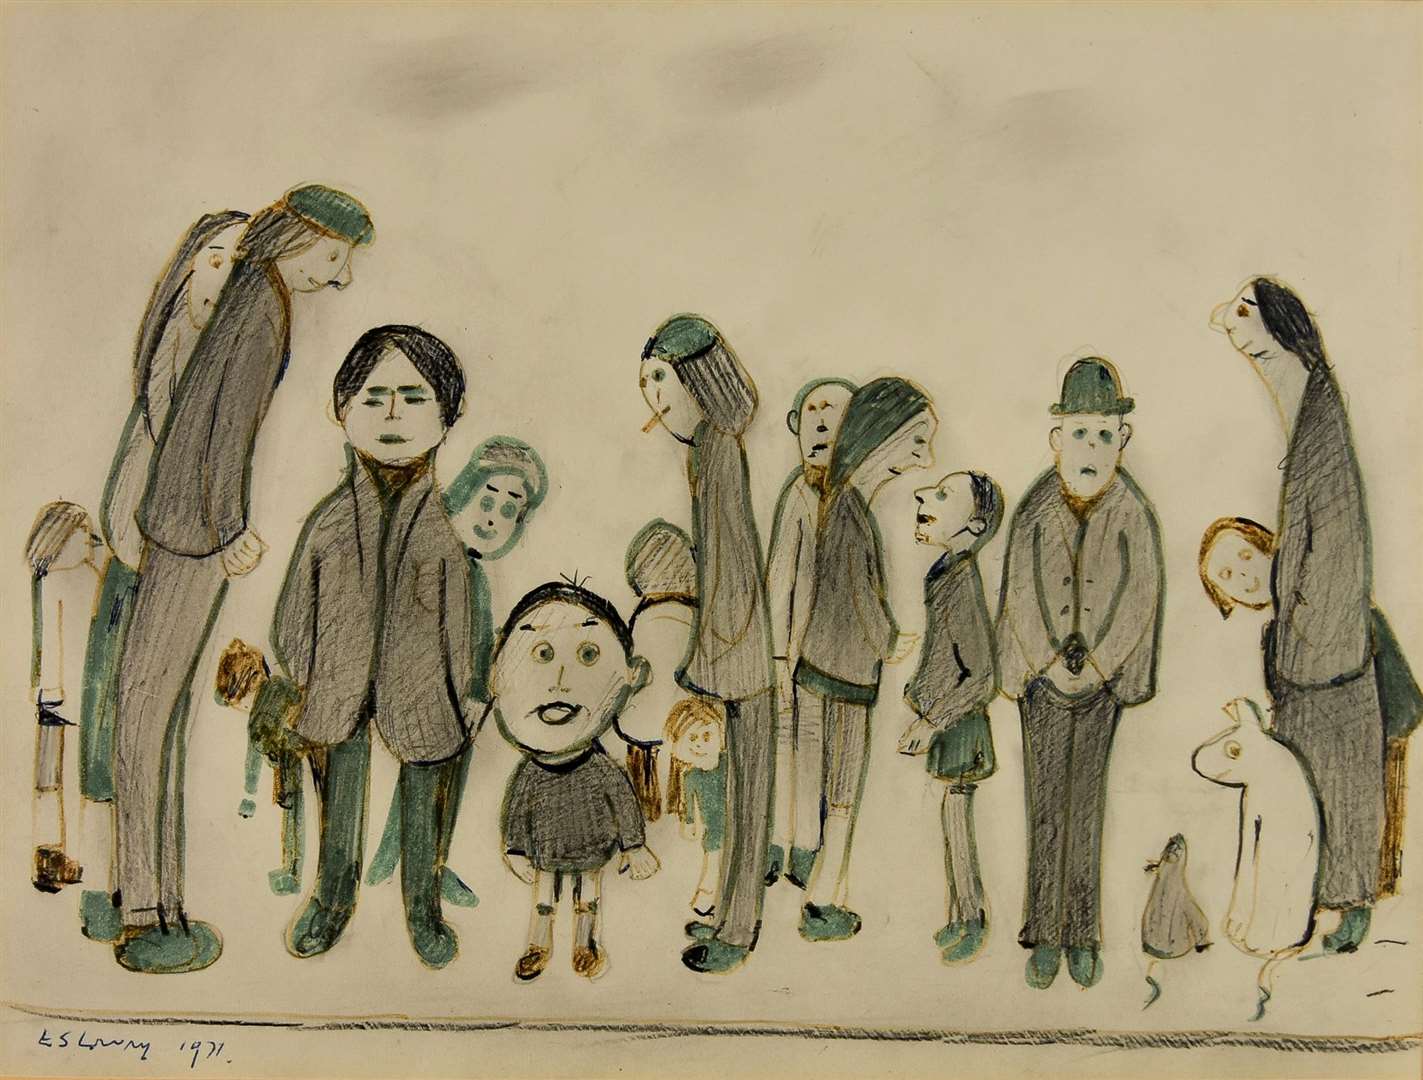 A pen and ink drawing by Lowry, signed and dated 1971, could fetch up to £30,000